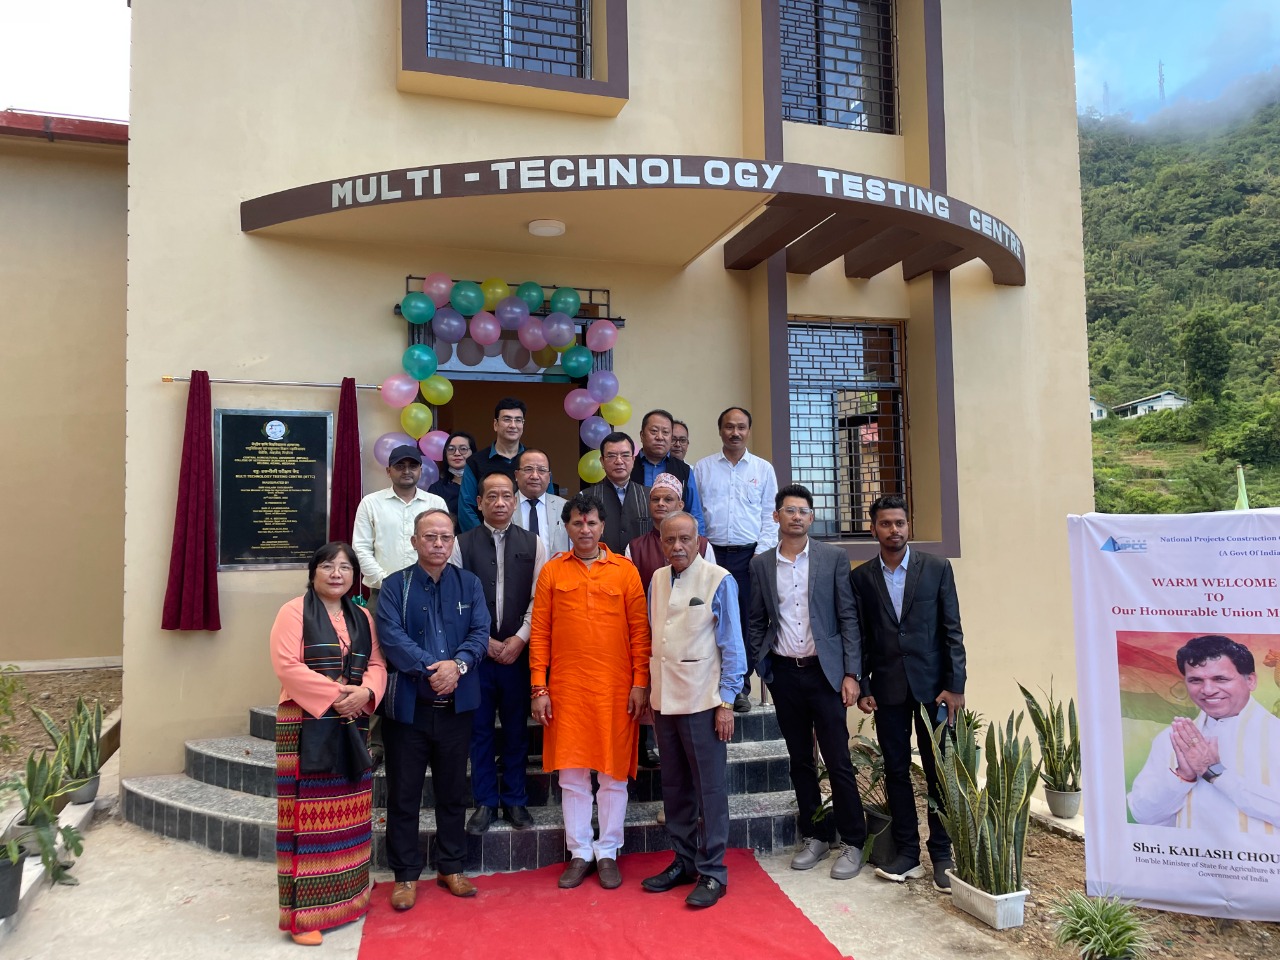 Inauguration of Multi Technology Testing Centre (MTTC) & Vocational Training Centre (VTC) at College of Veterinary Sciences & Animal Husbandry, Central Agricultural University (Imphal), Selesih, Mizoram by Shri. Kailash Choudhary, Union Minister of State for Agriculture and Farmers welfare